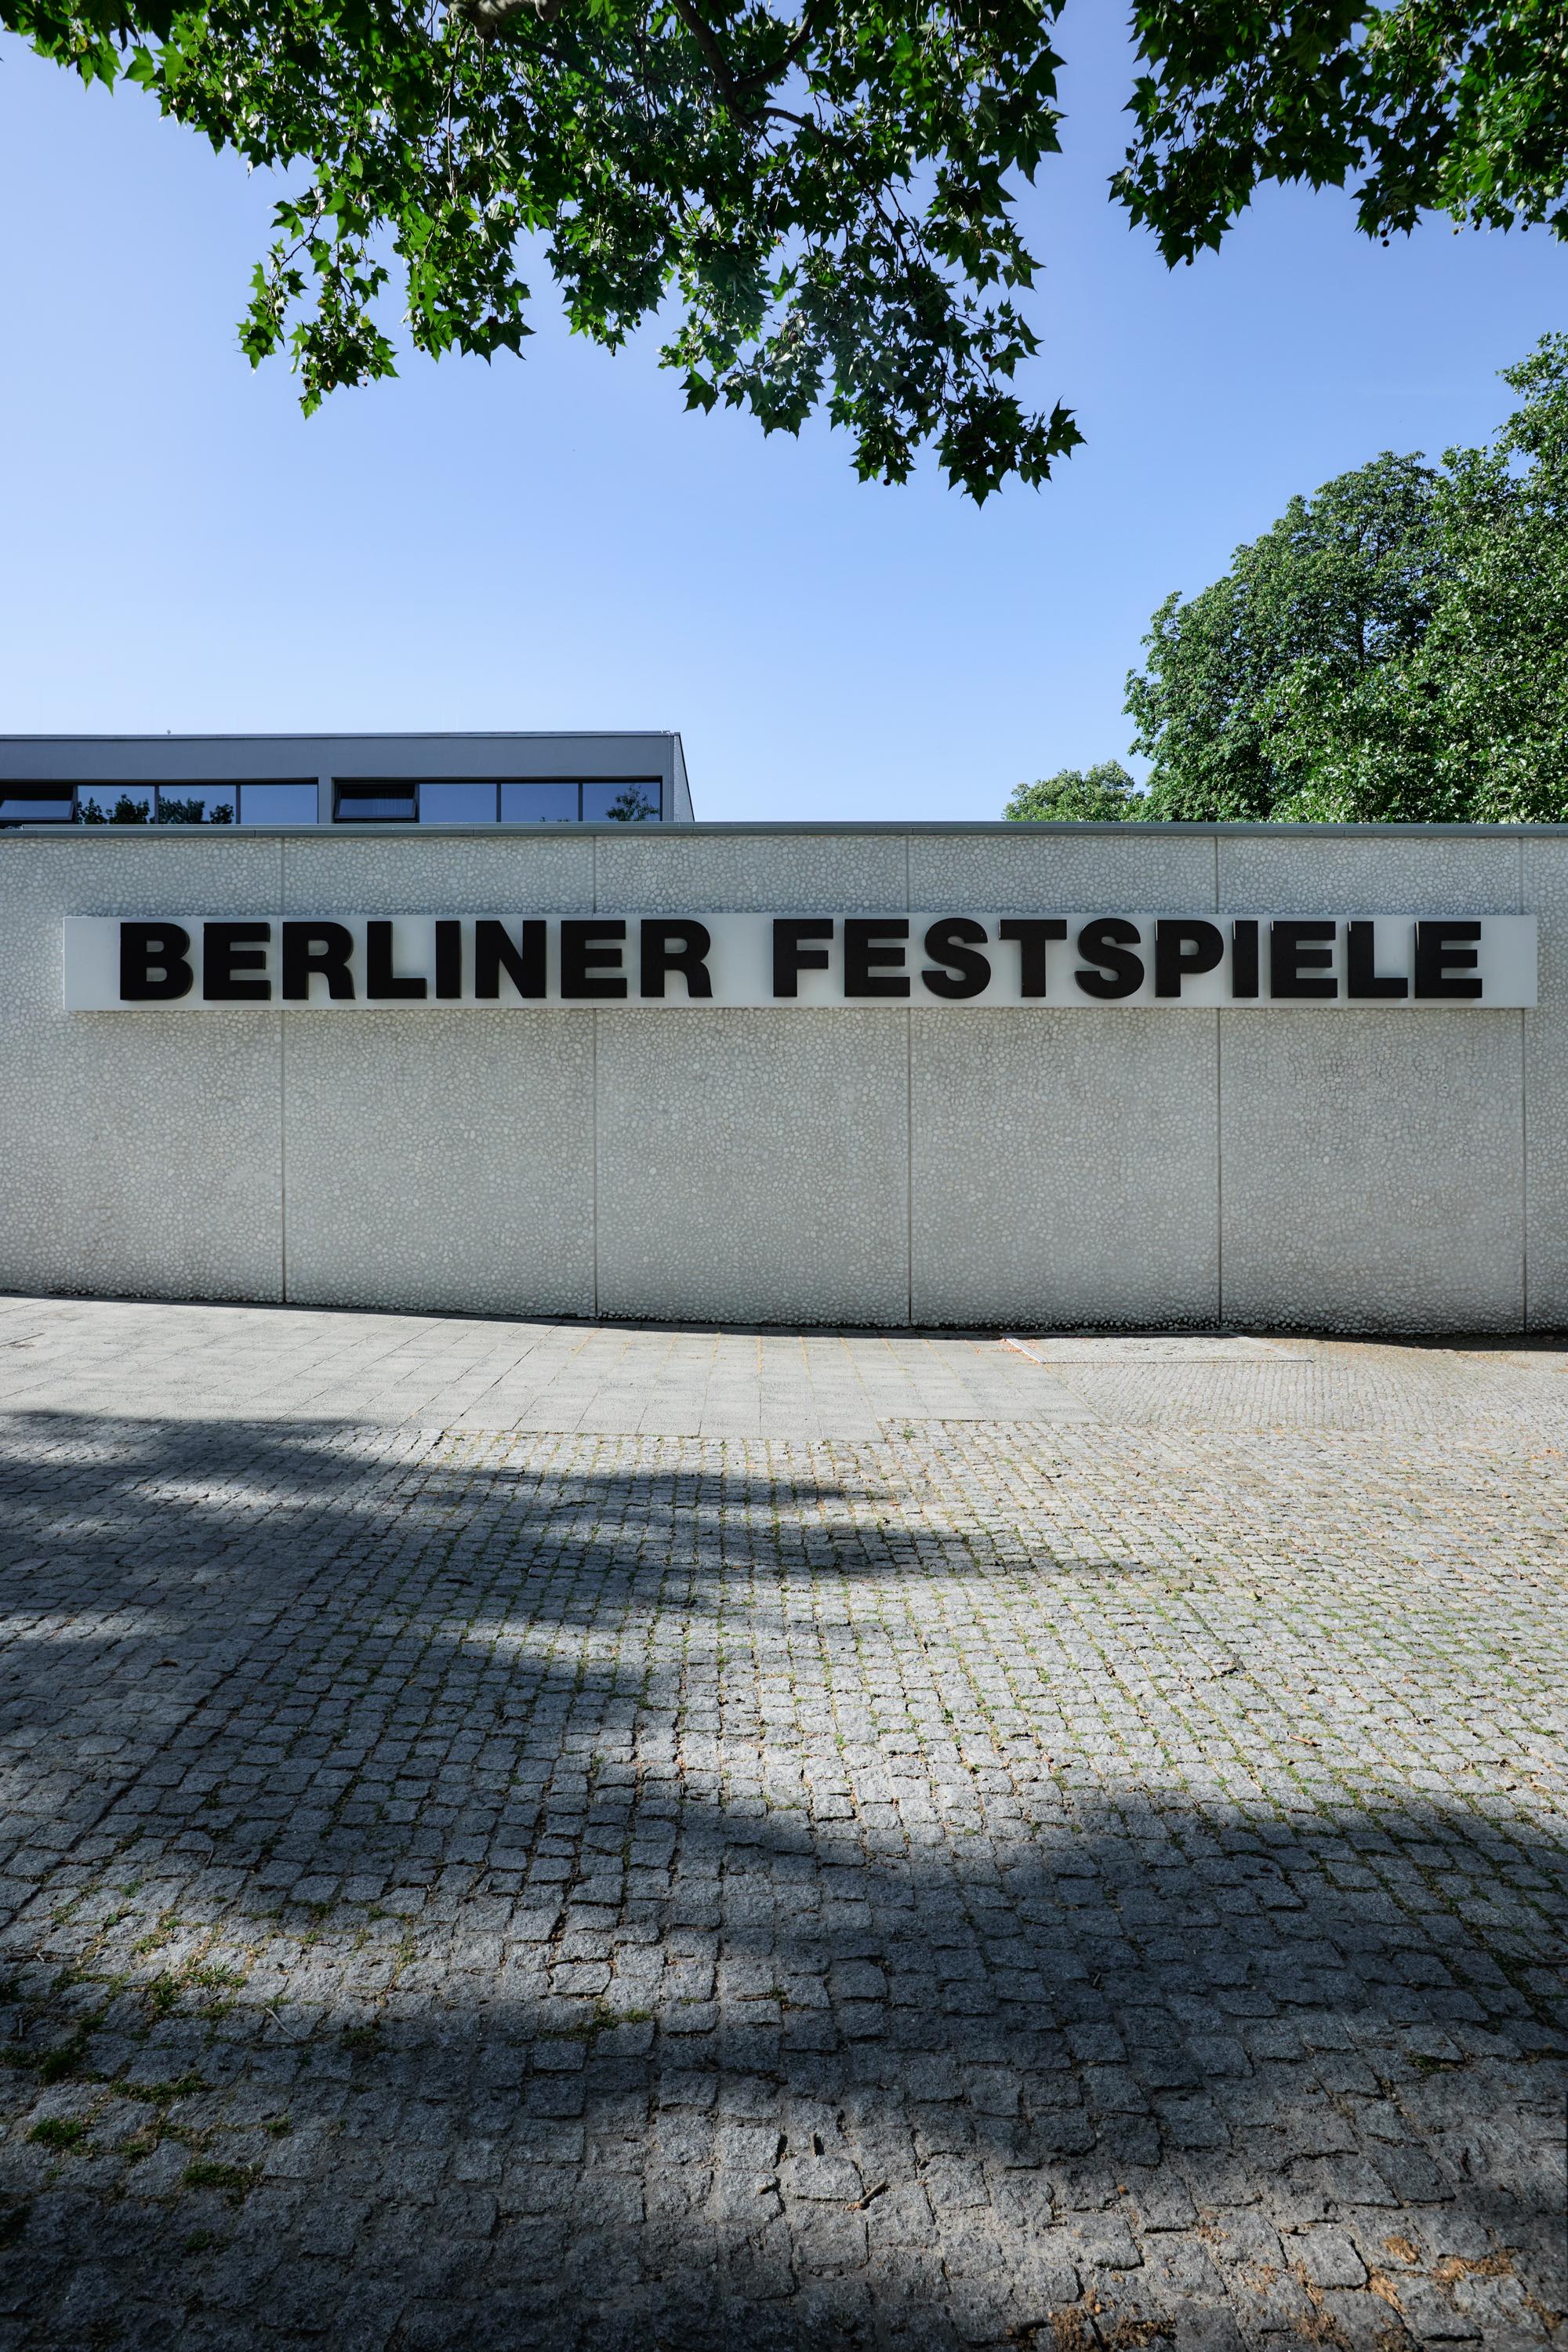 Frontal view of the Haus der Berliner Festspiele. You can see the Kassenhalle. "Berliner Festspiele" is written in black letters on the facade.